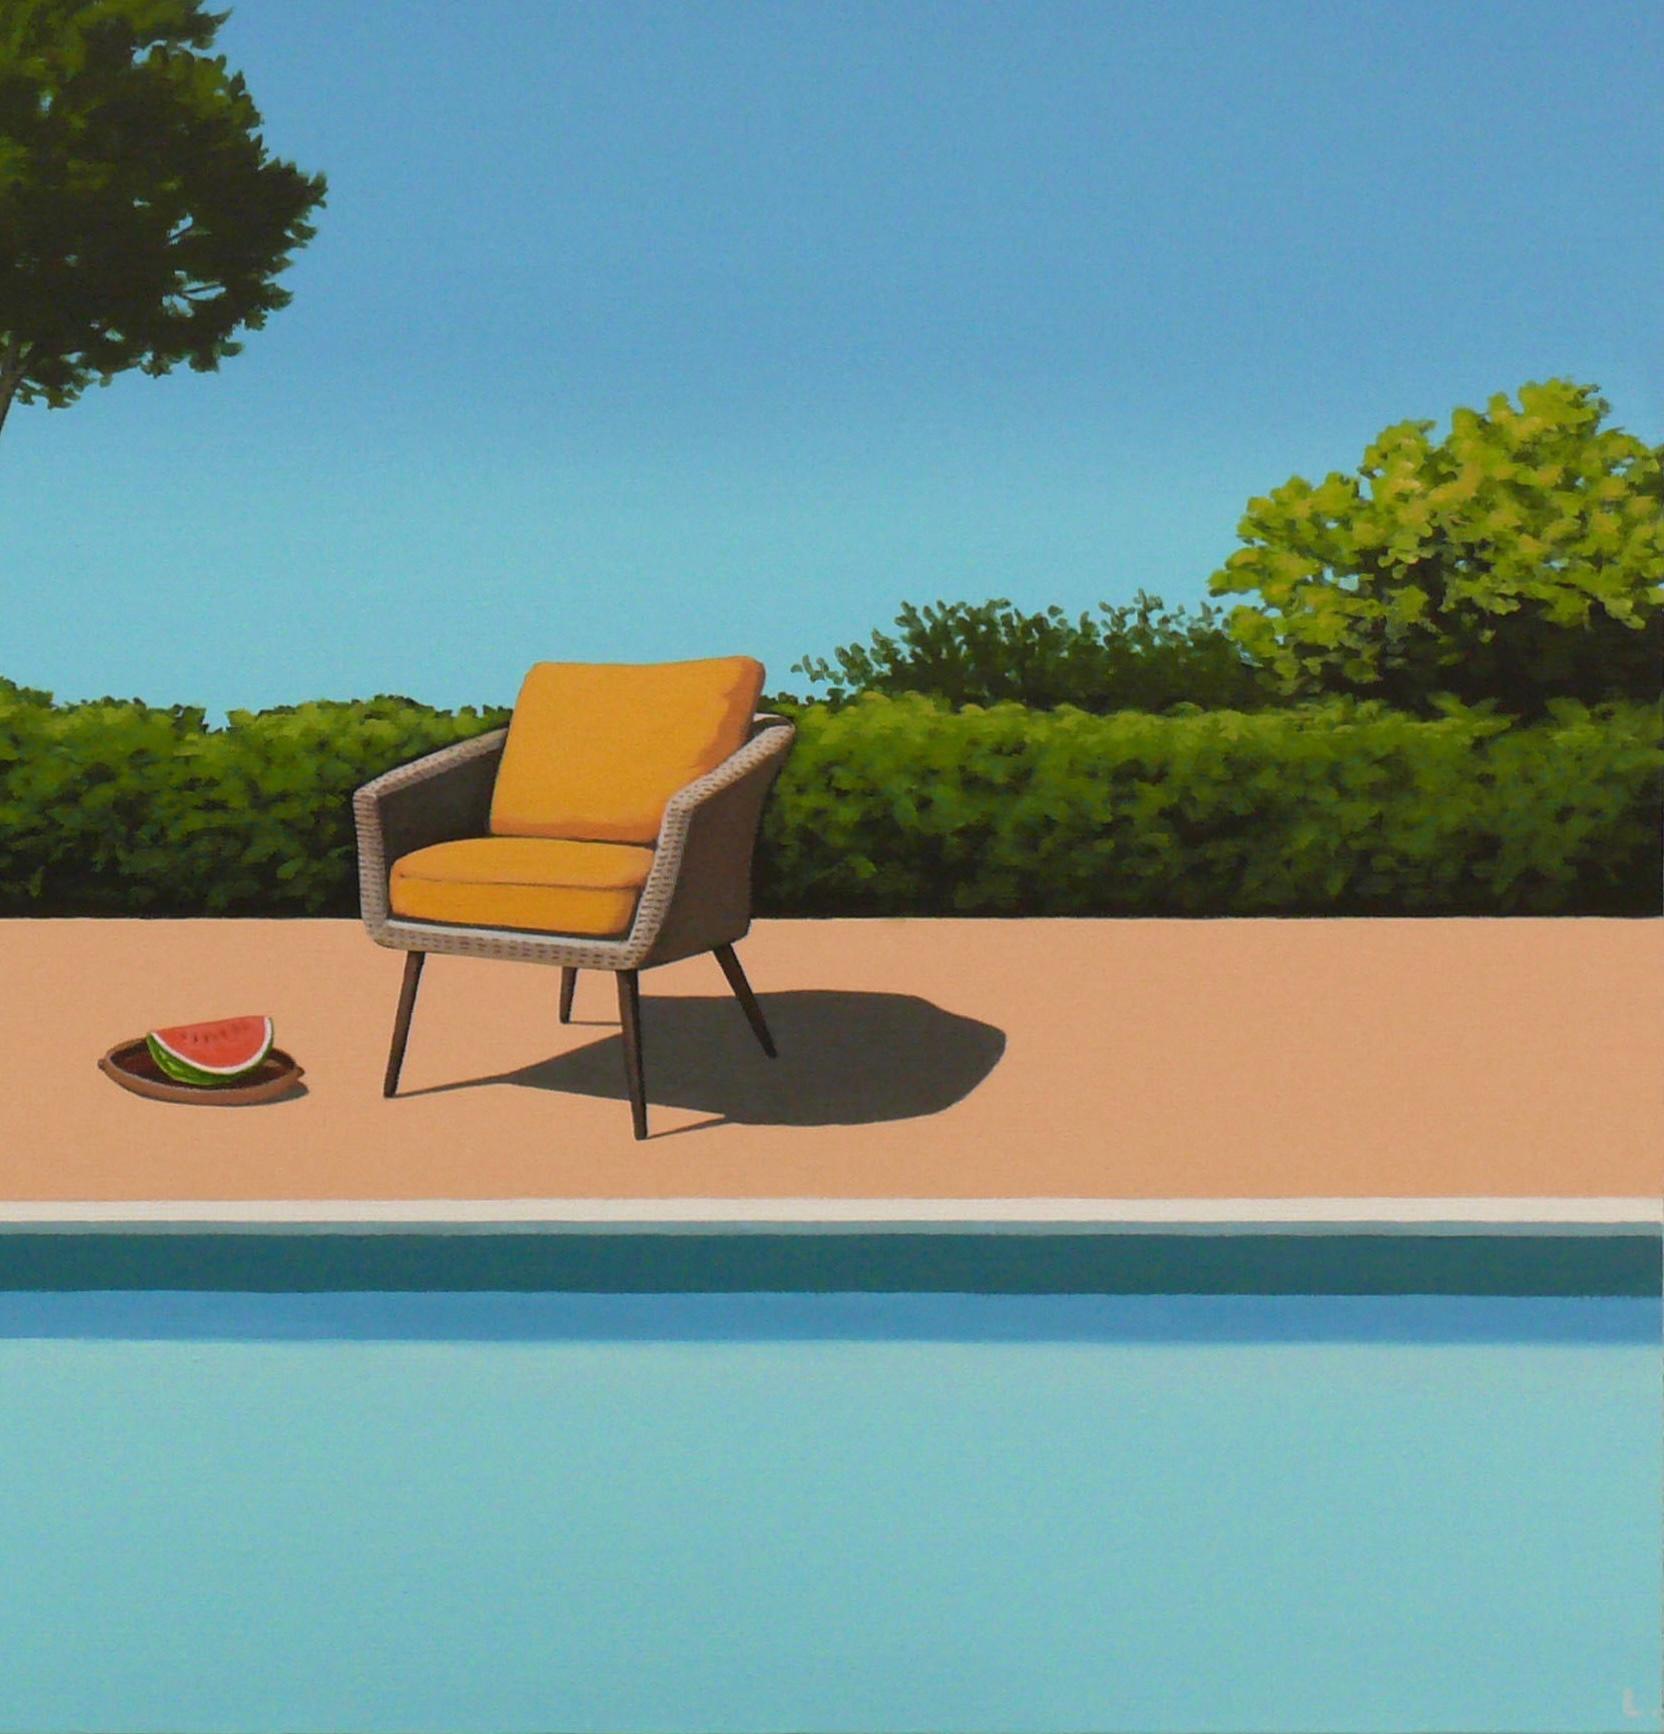 Watermelon by the pool - landscape painting - Contemporary Painting by Magdalena Laskowska